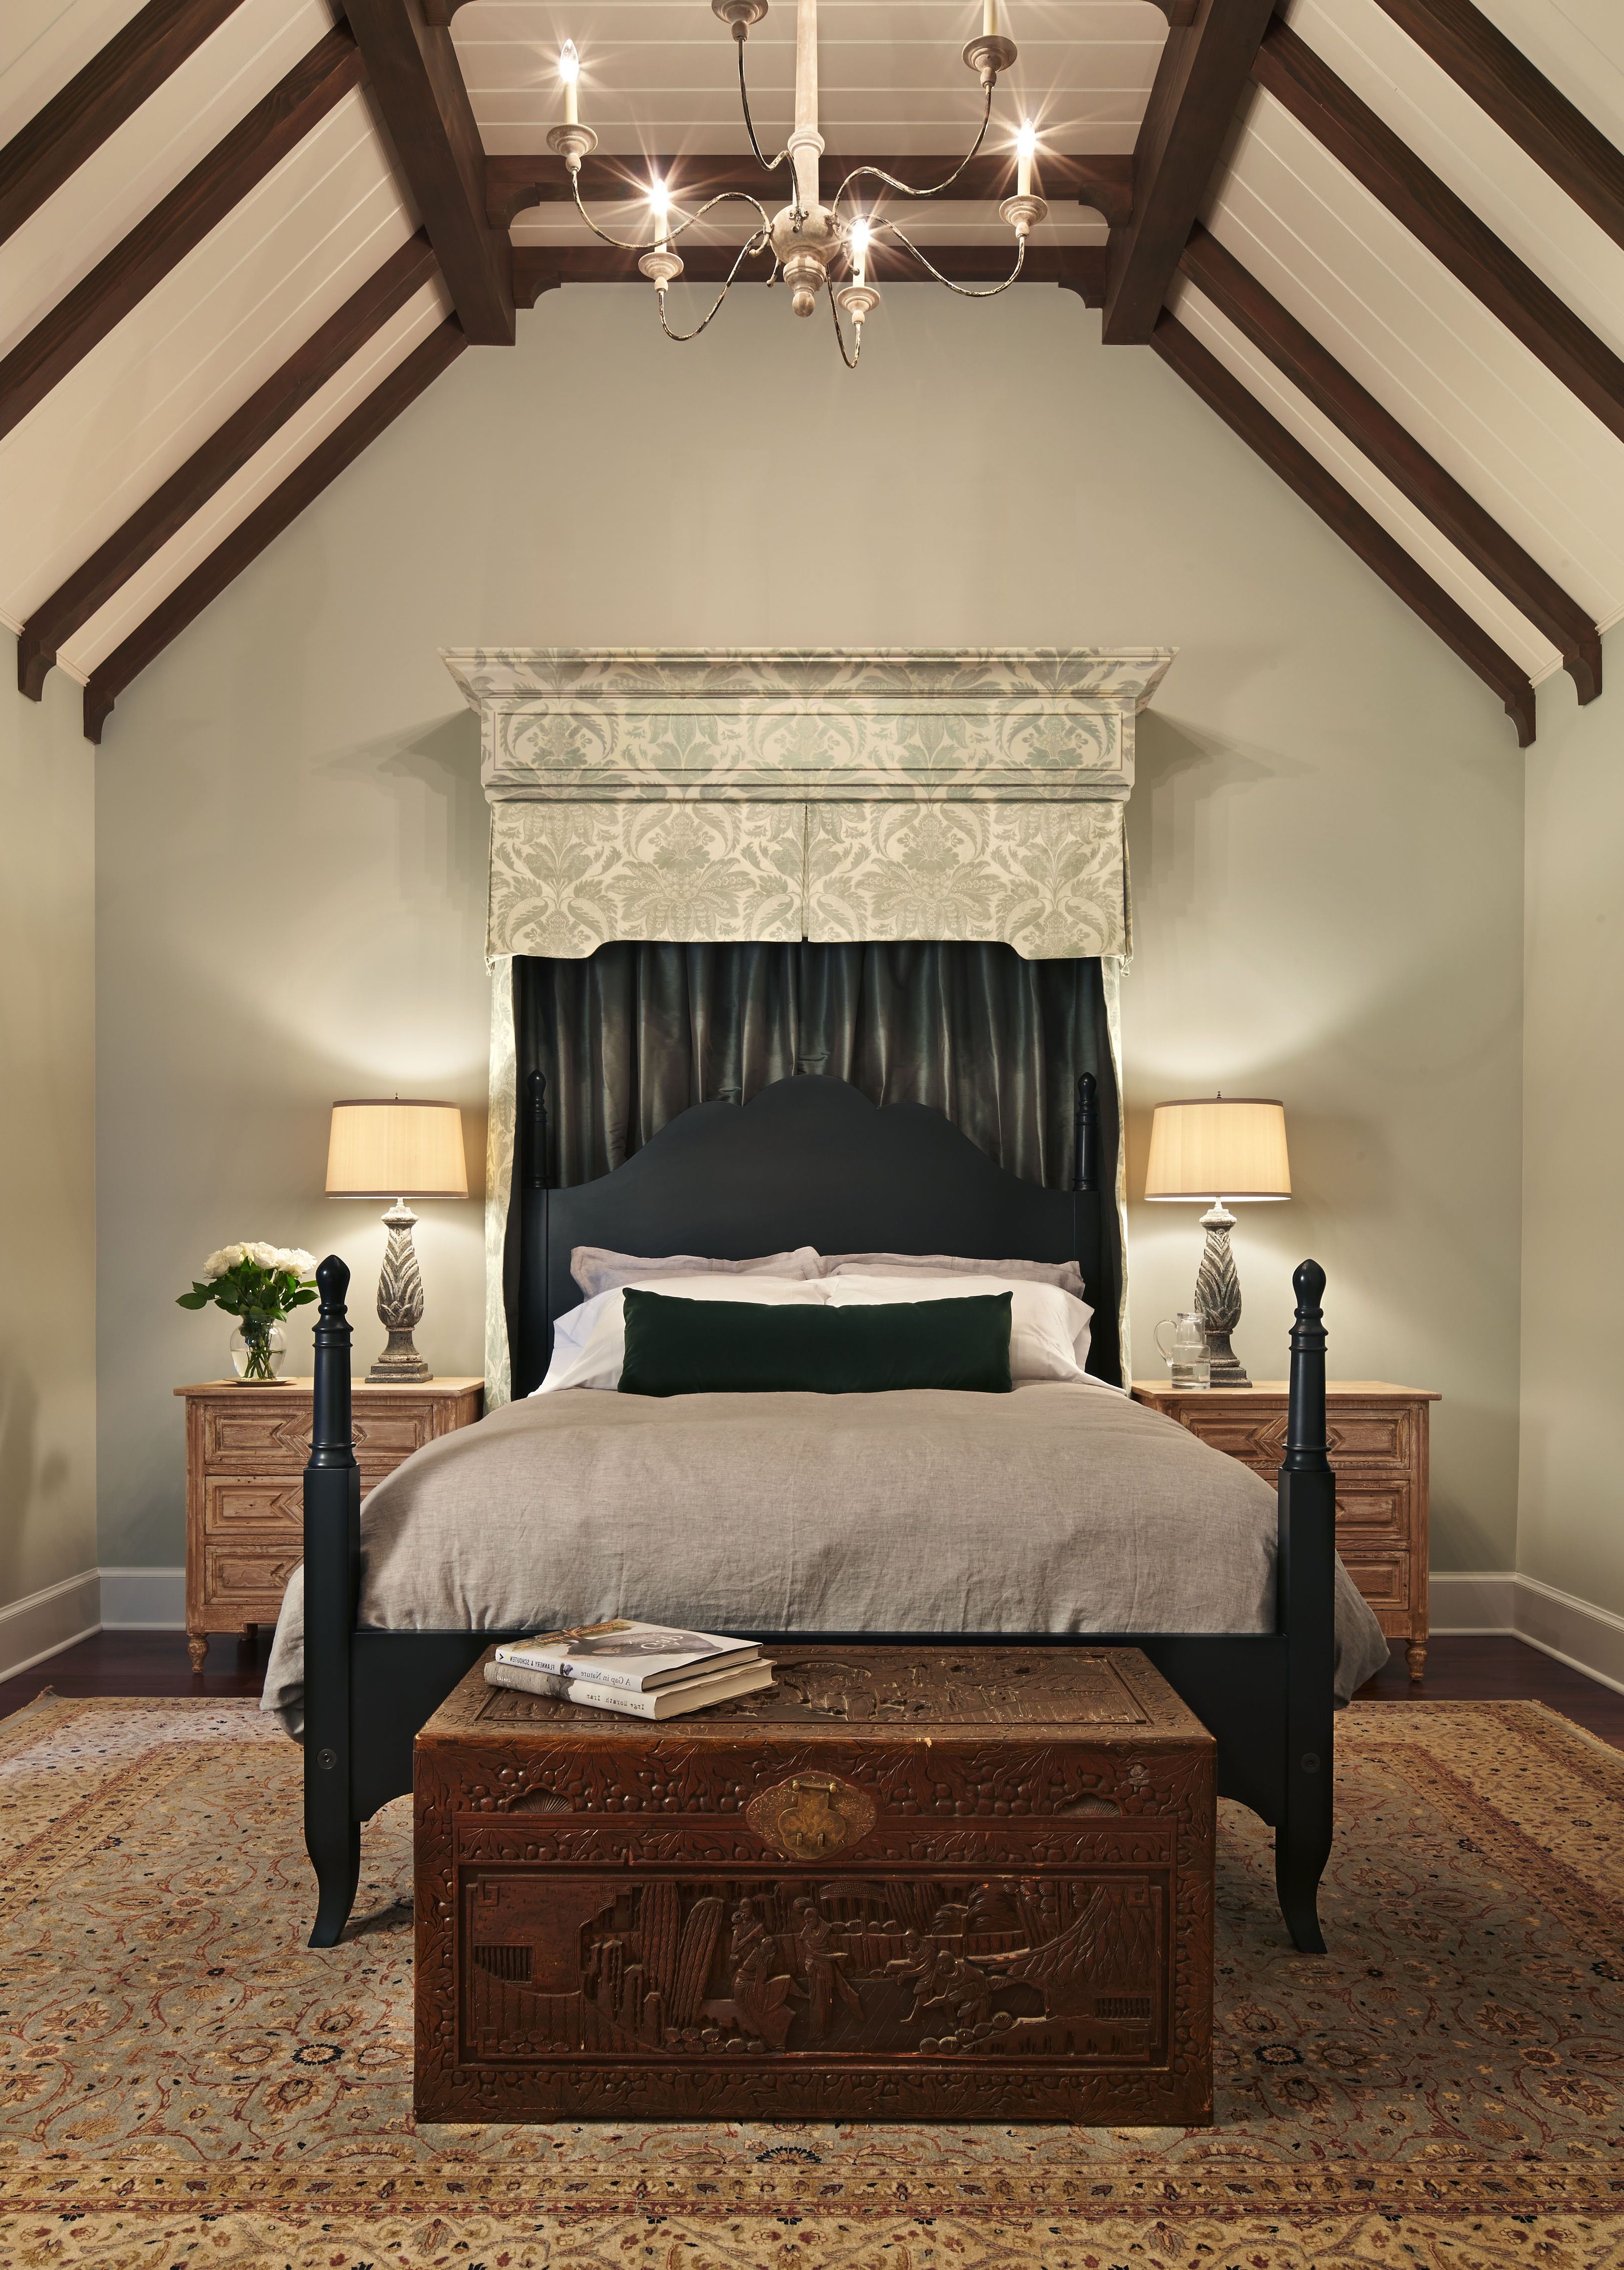 African Style Neutral Bedroom With Canopy Bed (View 5 of 10)